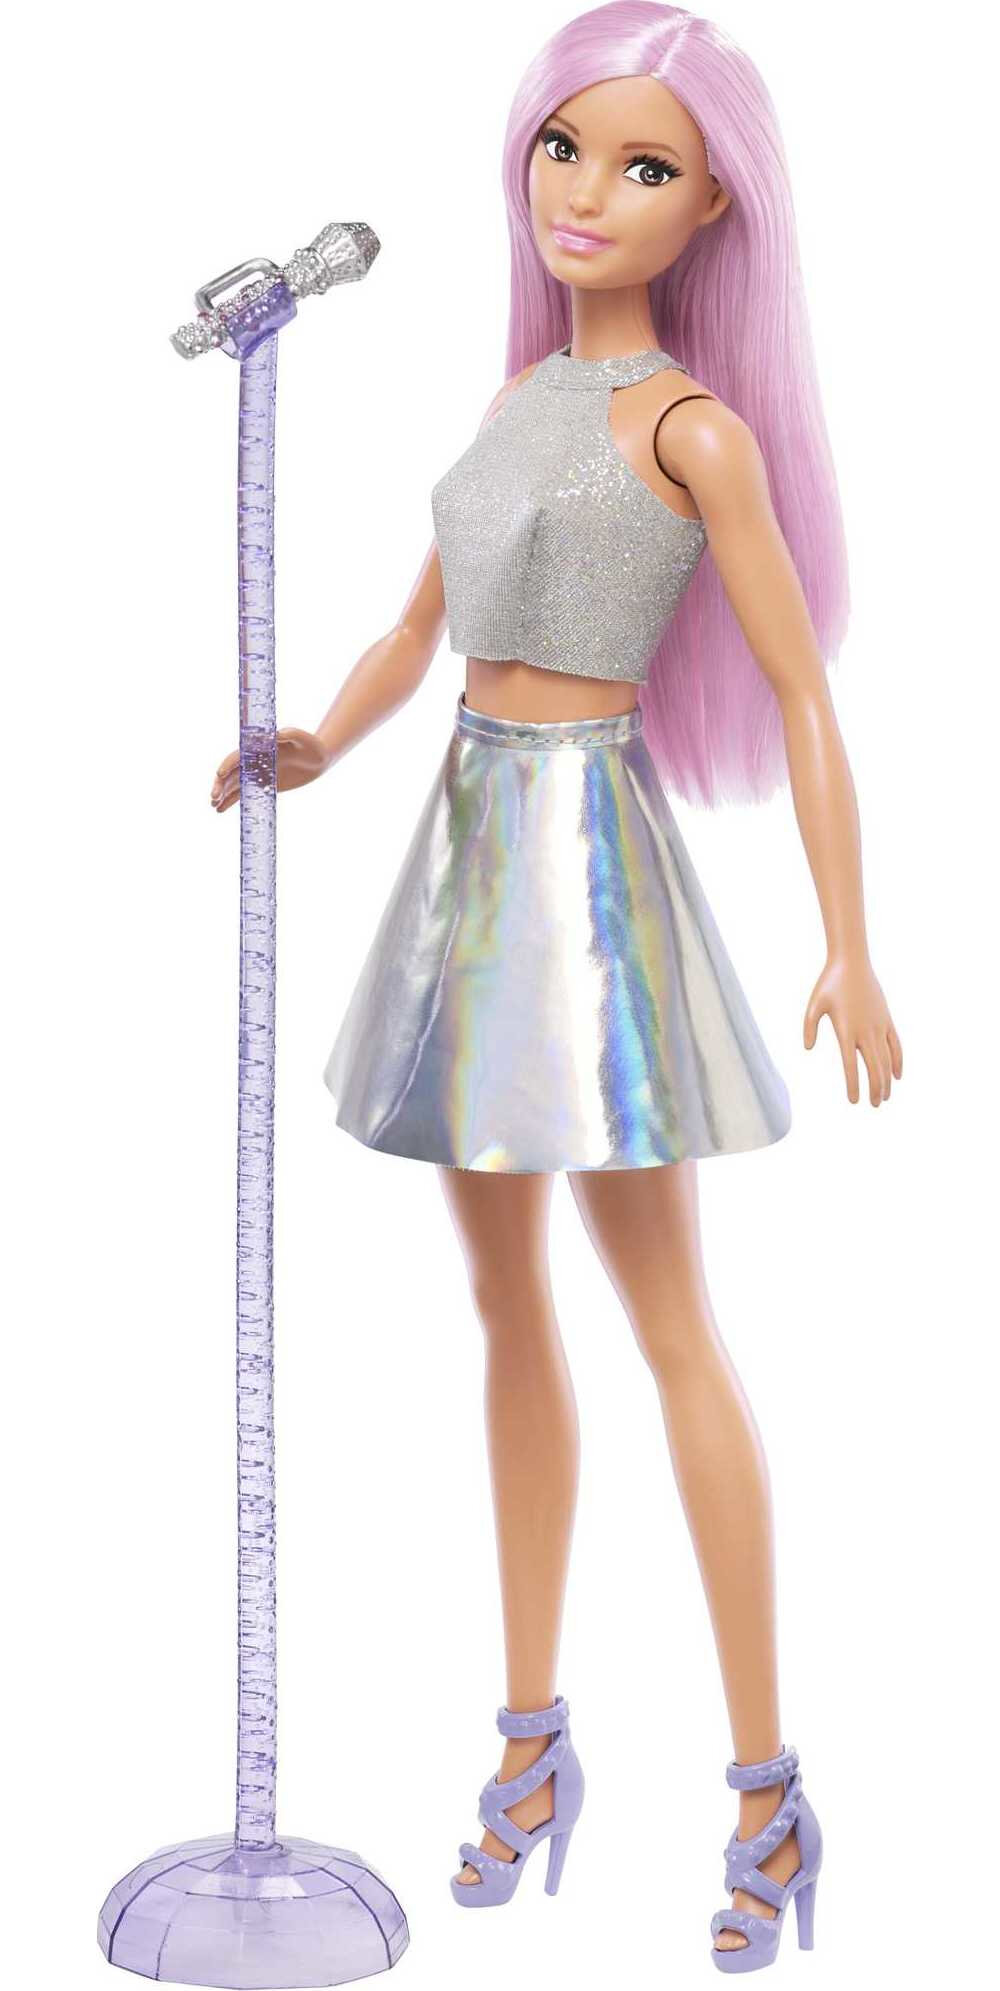 Barbie Pop Star Fashion Doll Dressed in Iridescent Skirt with Pink Hair & Brown Eyes - image 1 of 6